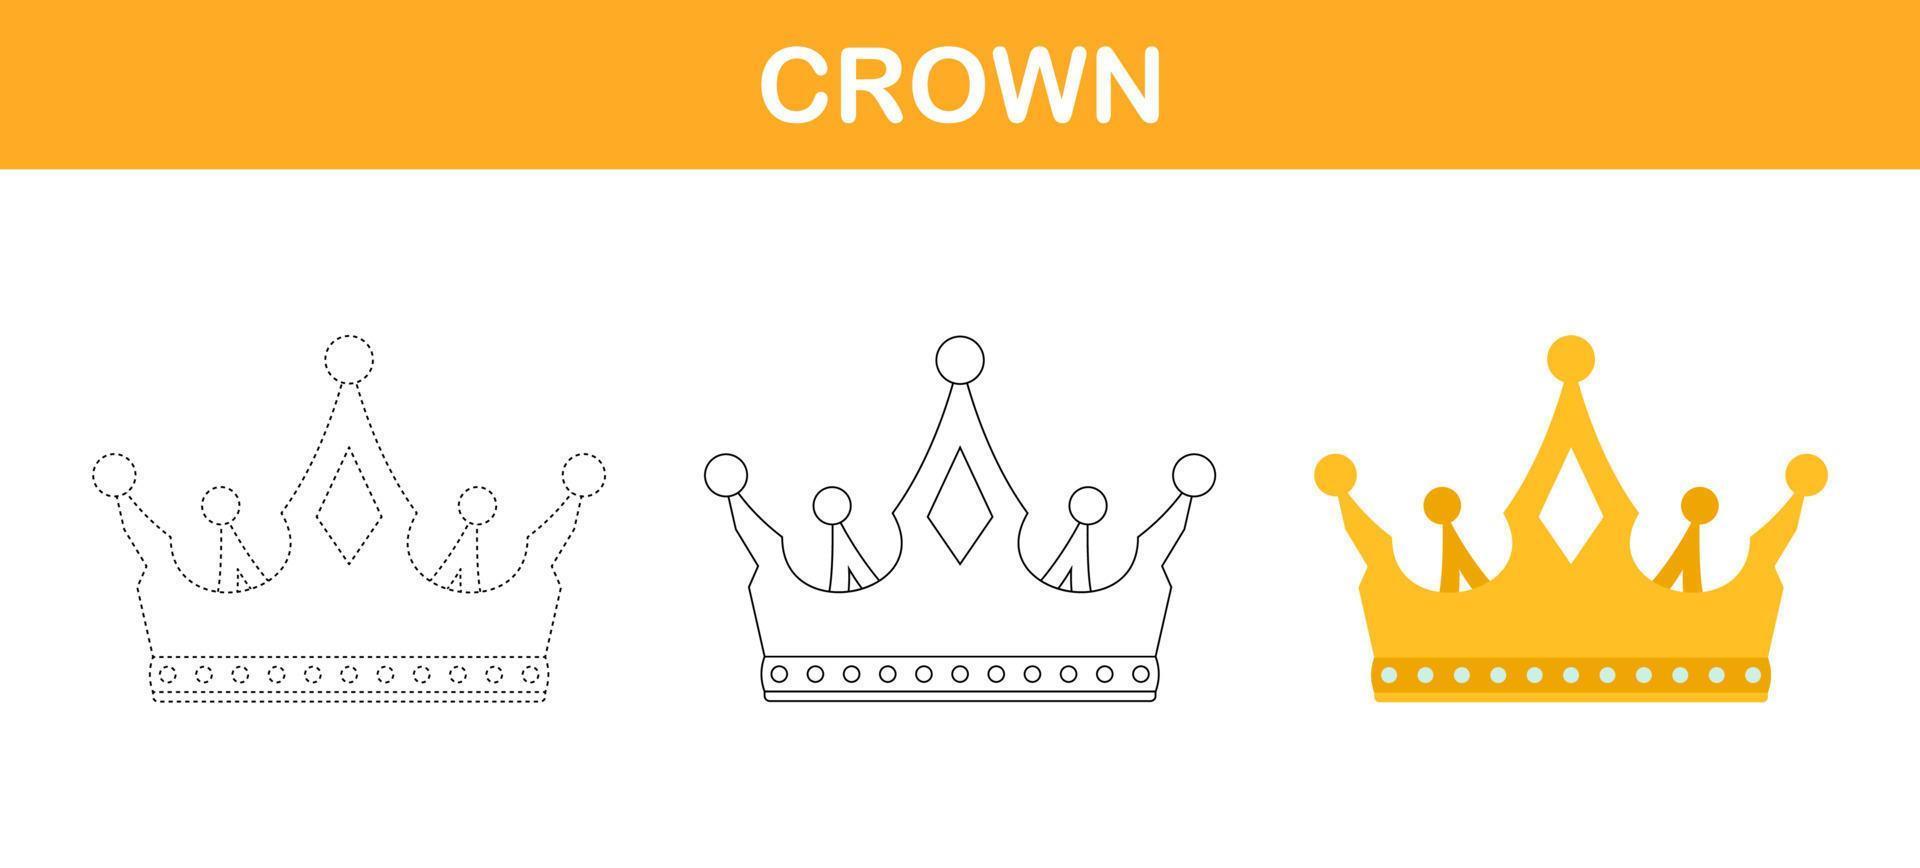 Crown tracing and coloring worksheet for kids vector